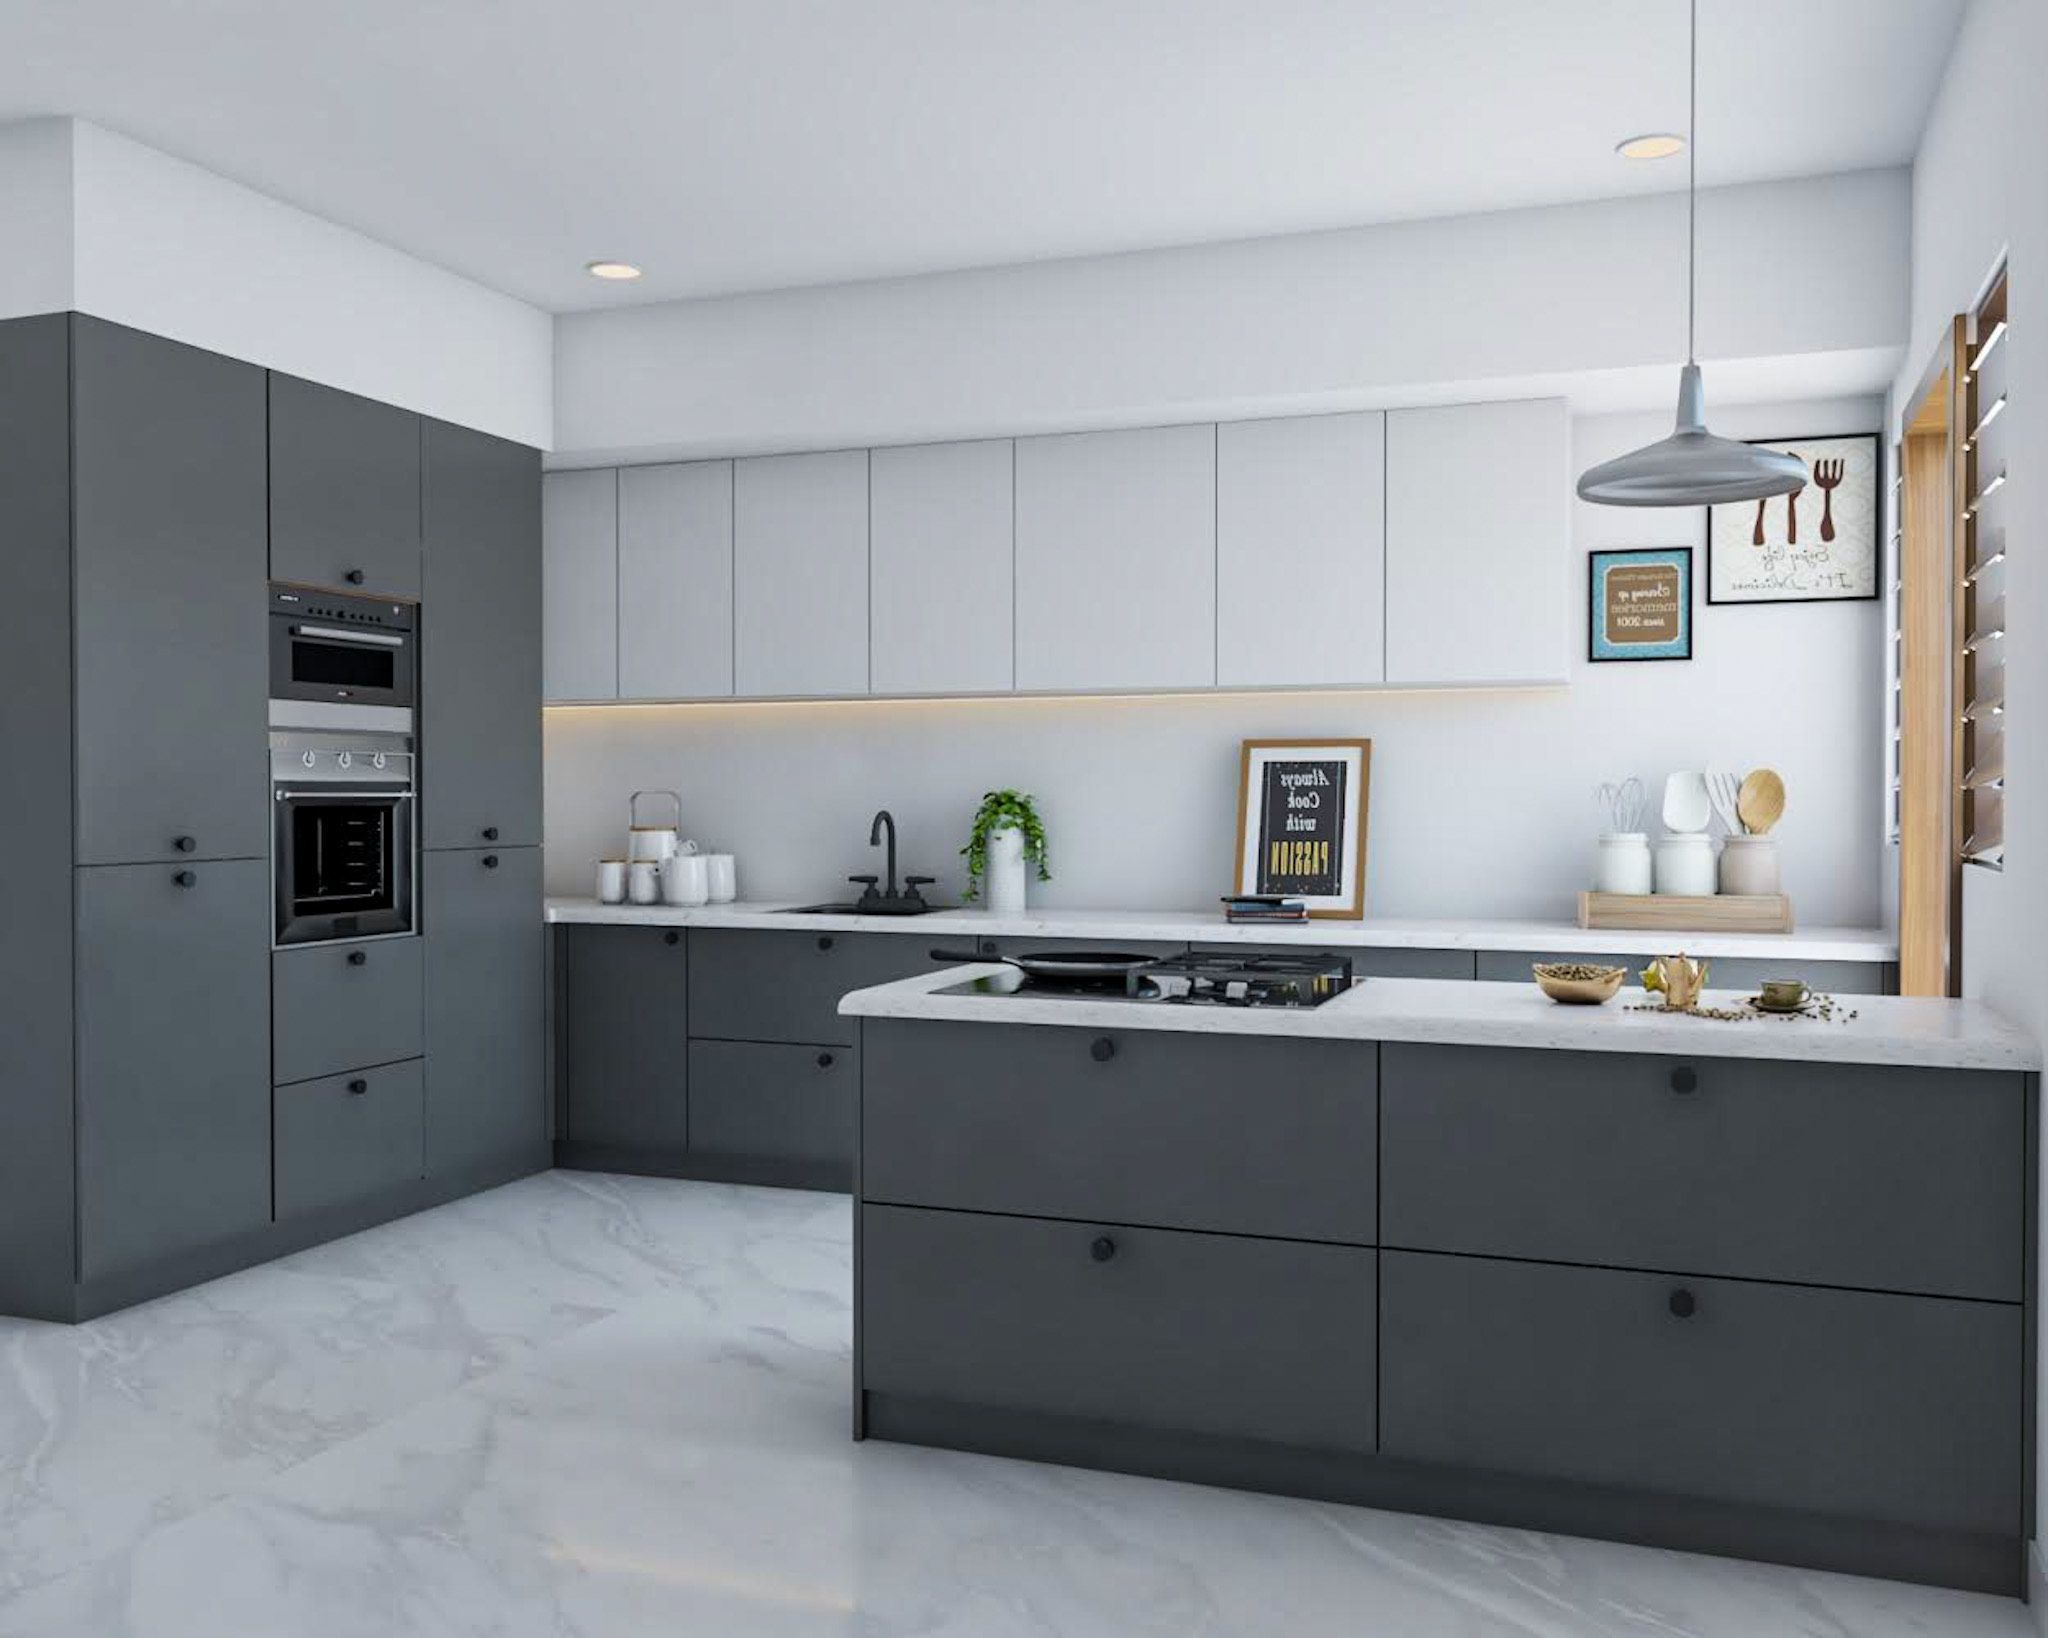 Contemporary Kitchen Design With Grey And White Hues